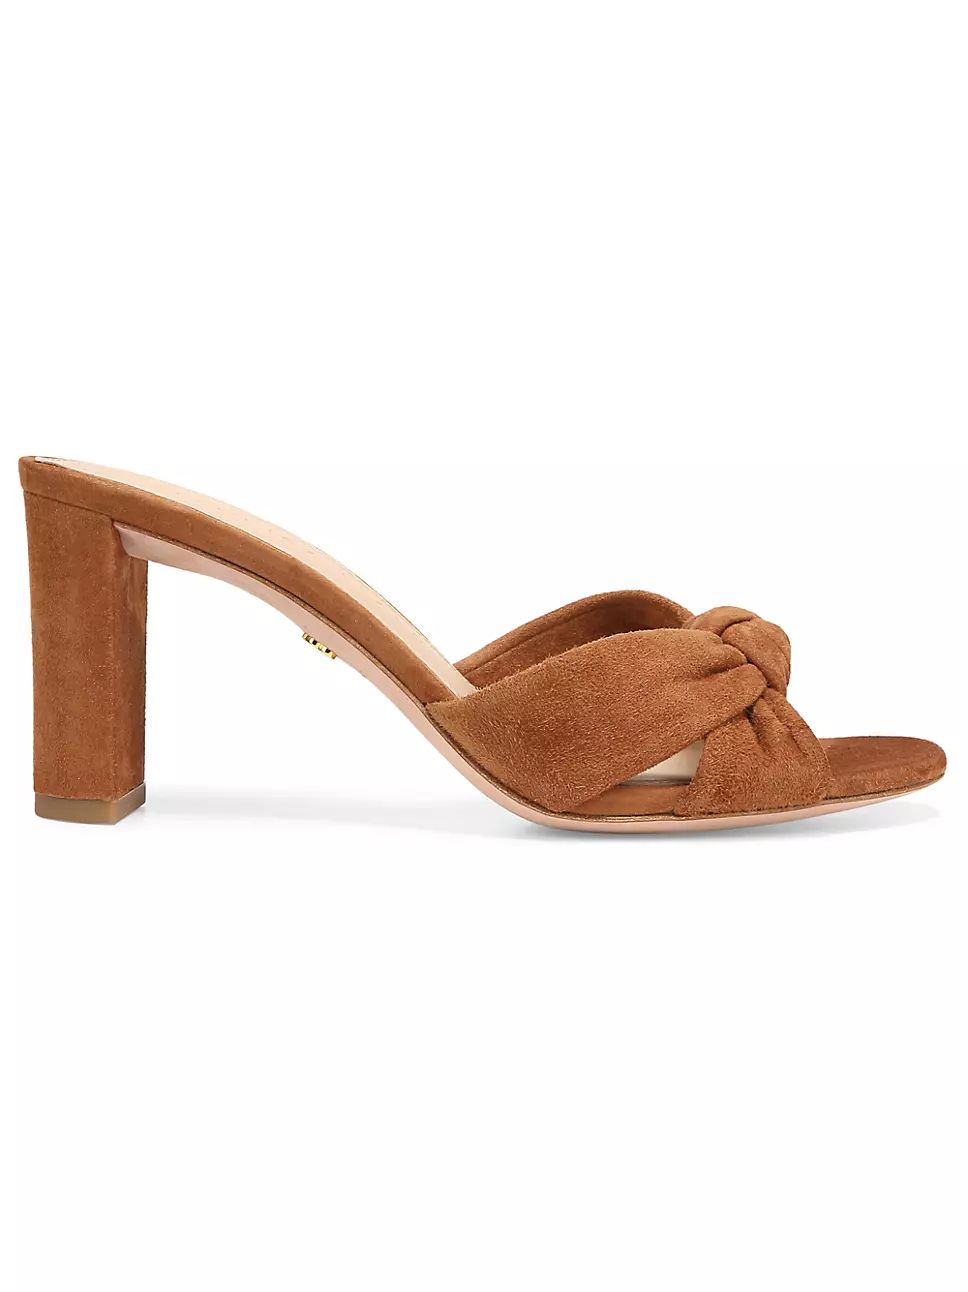 Ganita 76MM Suede Knotted Sandals | Saks Fifth Avenue